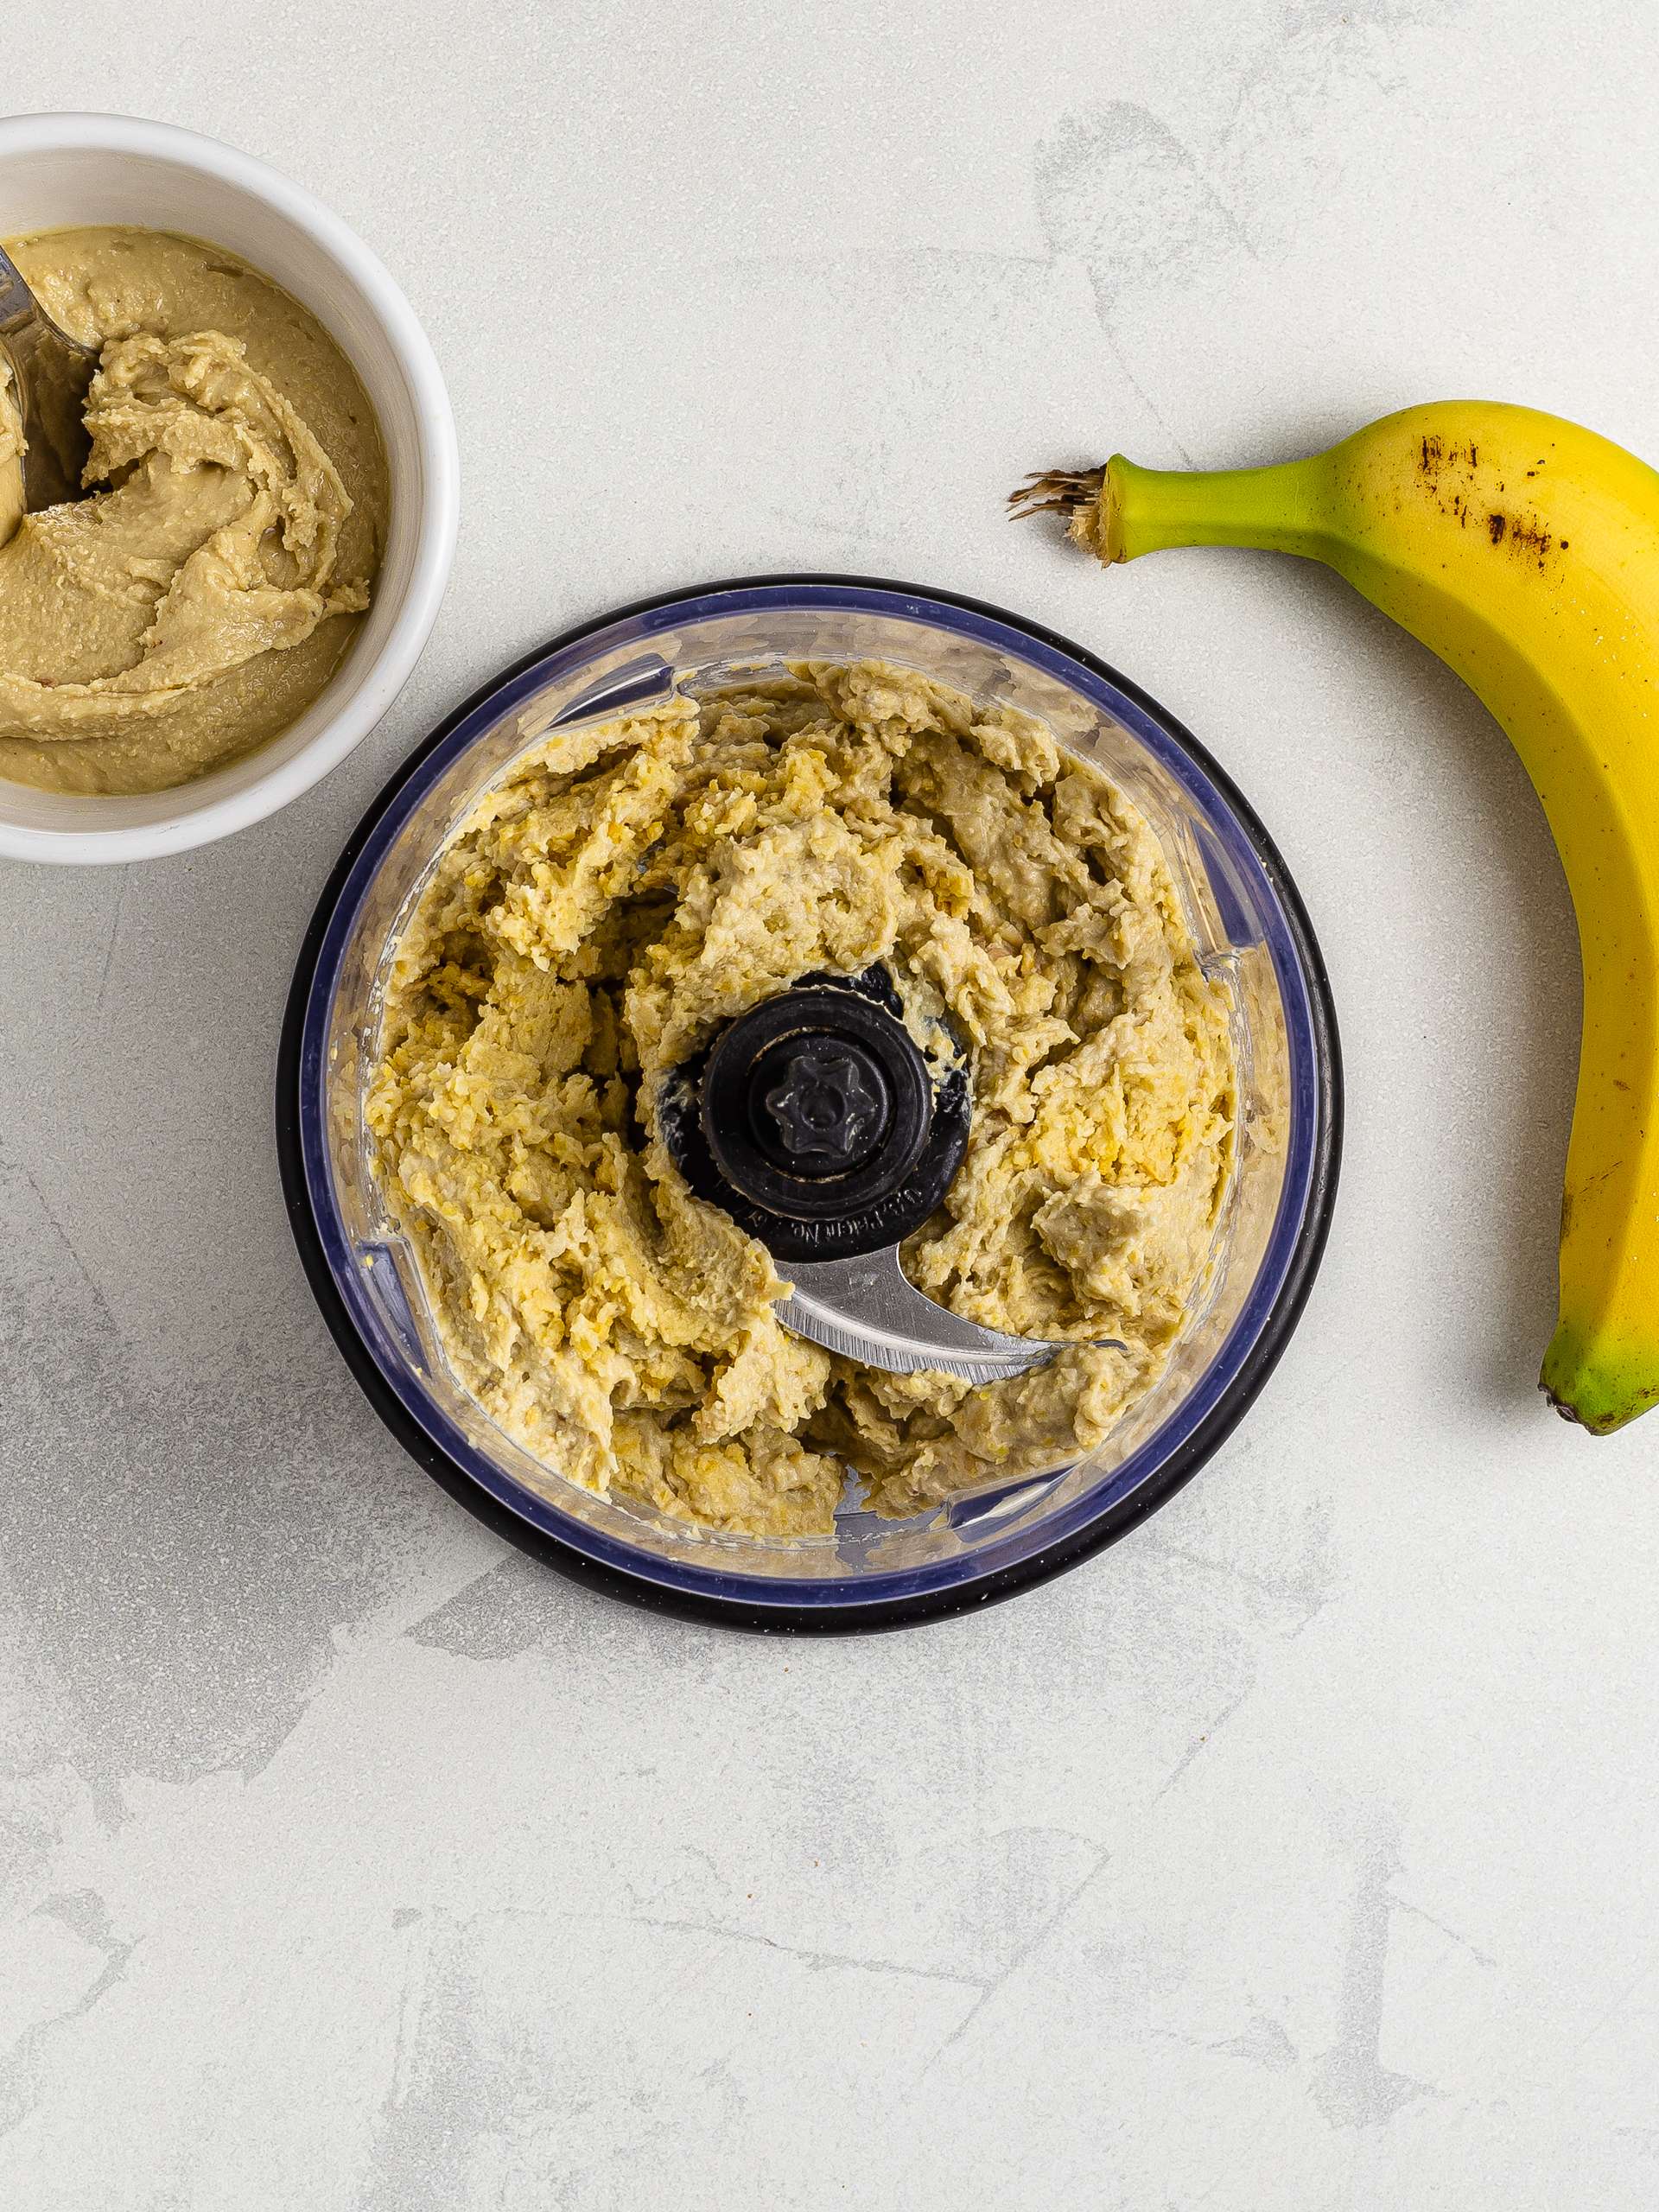 mashed chickpeas with banana and cashew butter